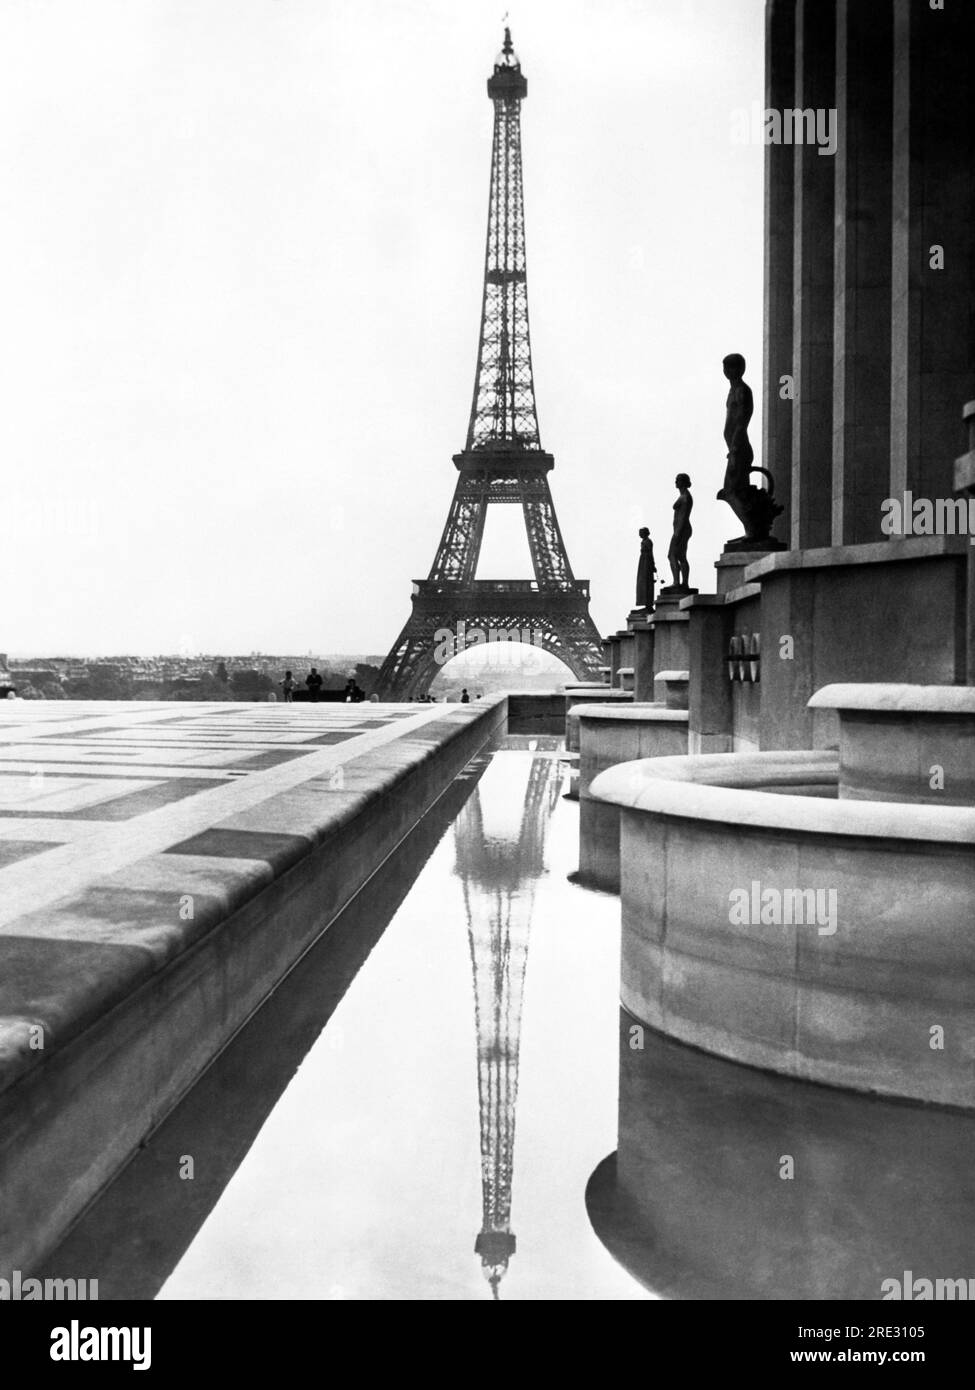 Paris, France:  c. 1938 The Eiffel Tower is reflected in the pool in front of the Trocadero in Paris. Stock Photo